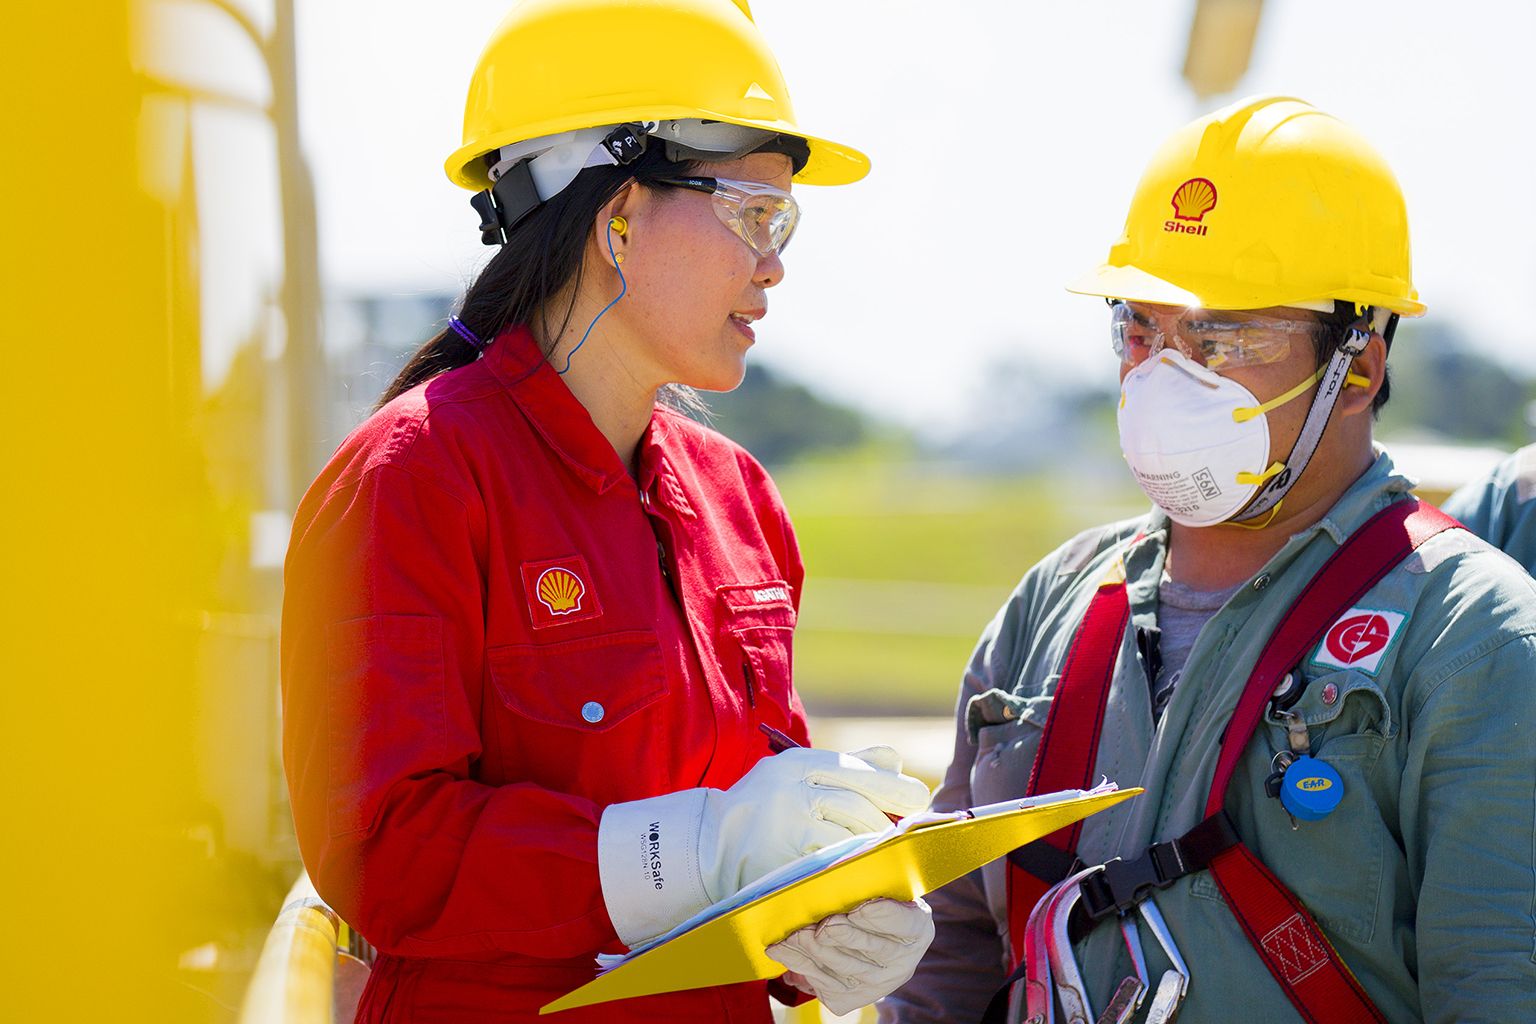 Two people talking wearing hard hats and safety gear